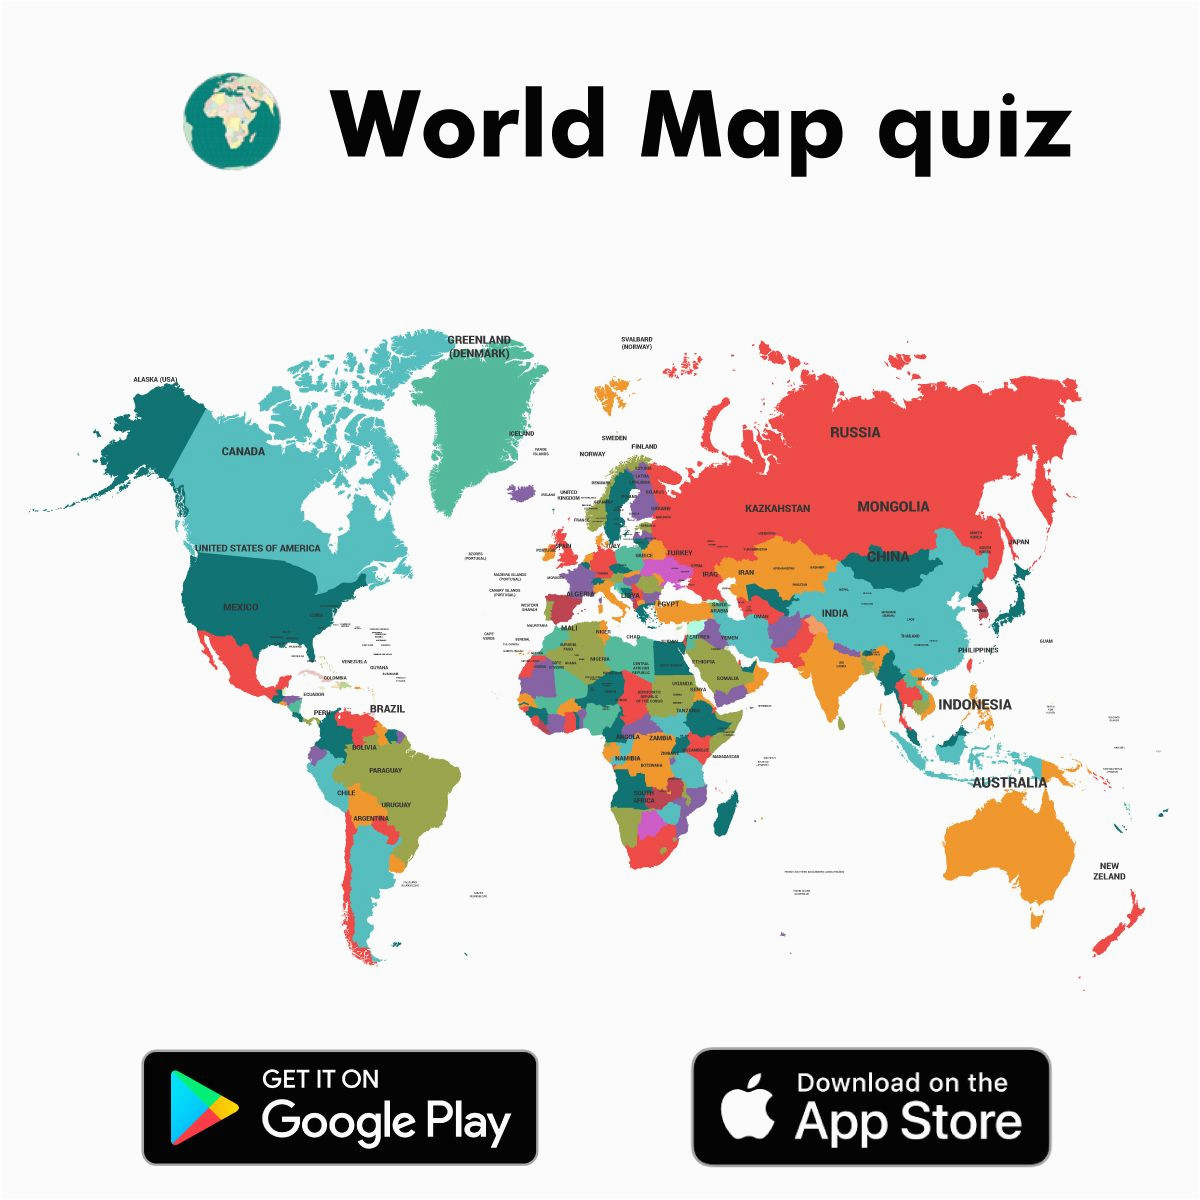 Europe Map Quiz Easy World Map Quiz App is An Interesting App Developed for Kids